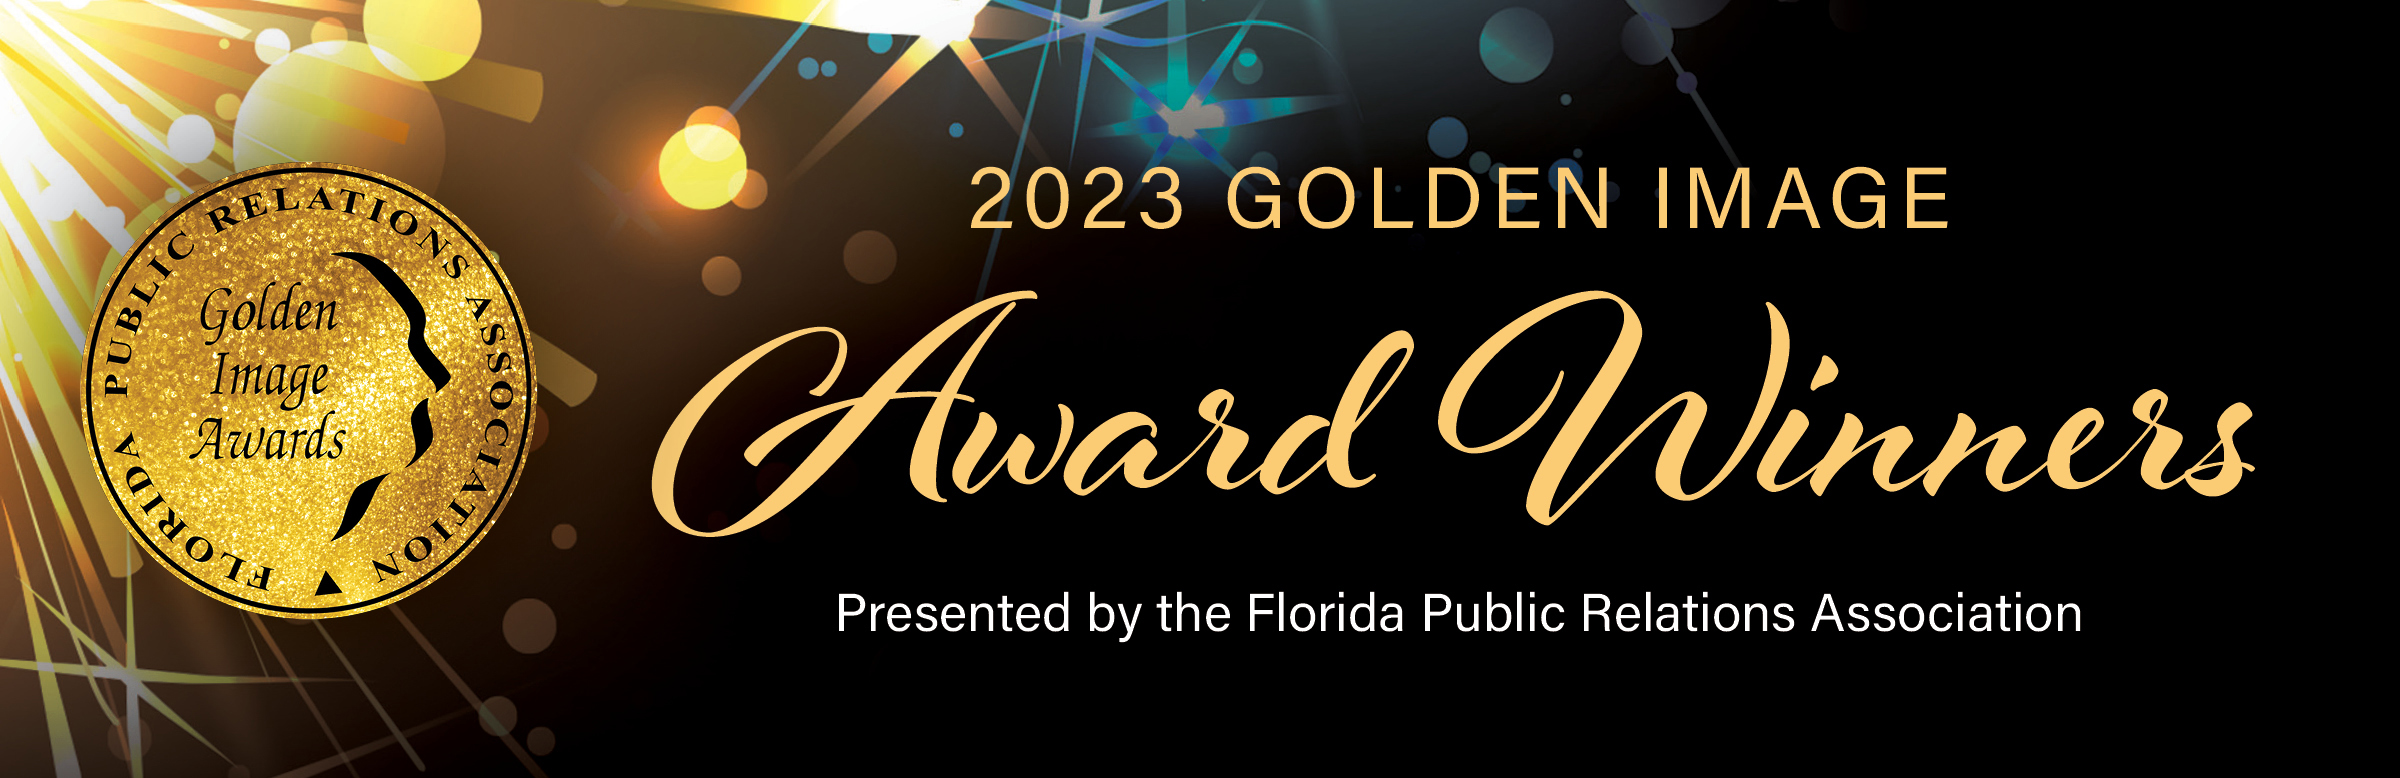 2023 Golden Image Awards winners presented by the Florida Public Relations Association banner